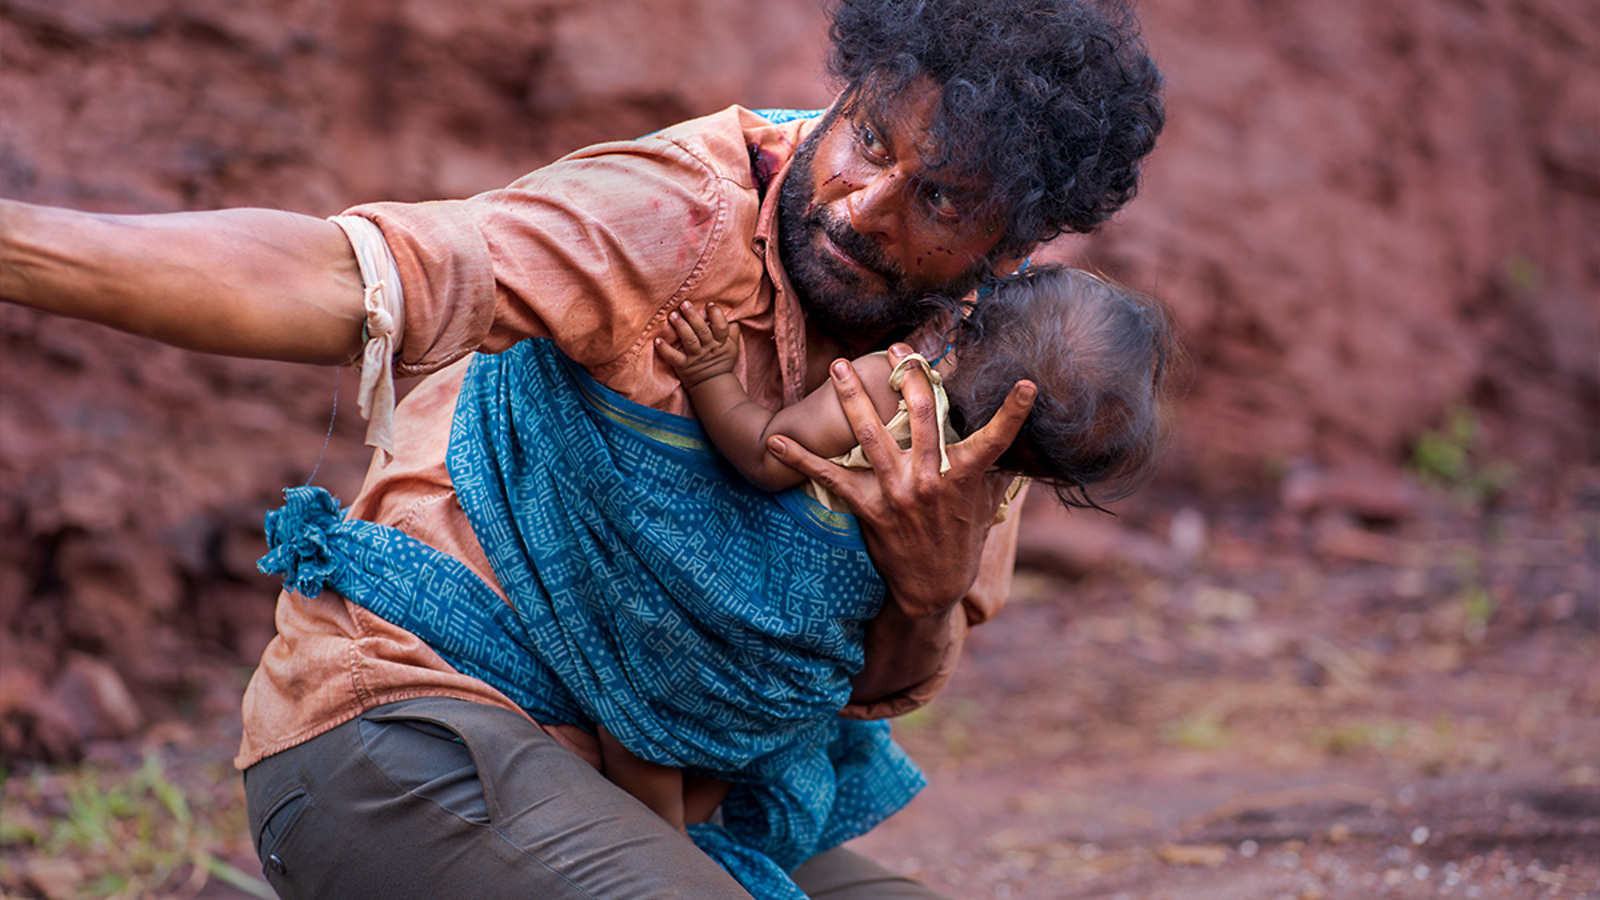 Dasru, bloodied and panicked, cradles his baby in a scene from JORAM